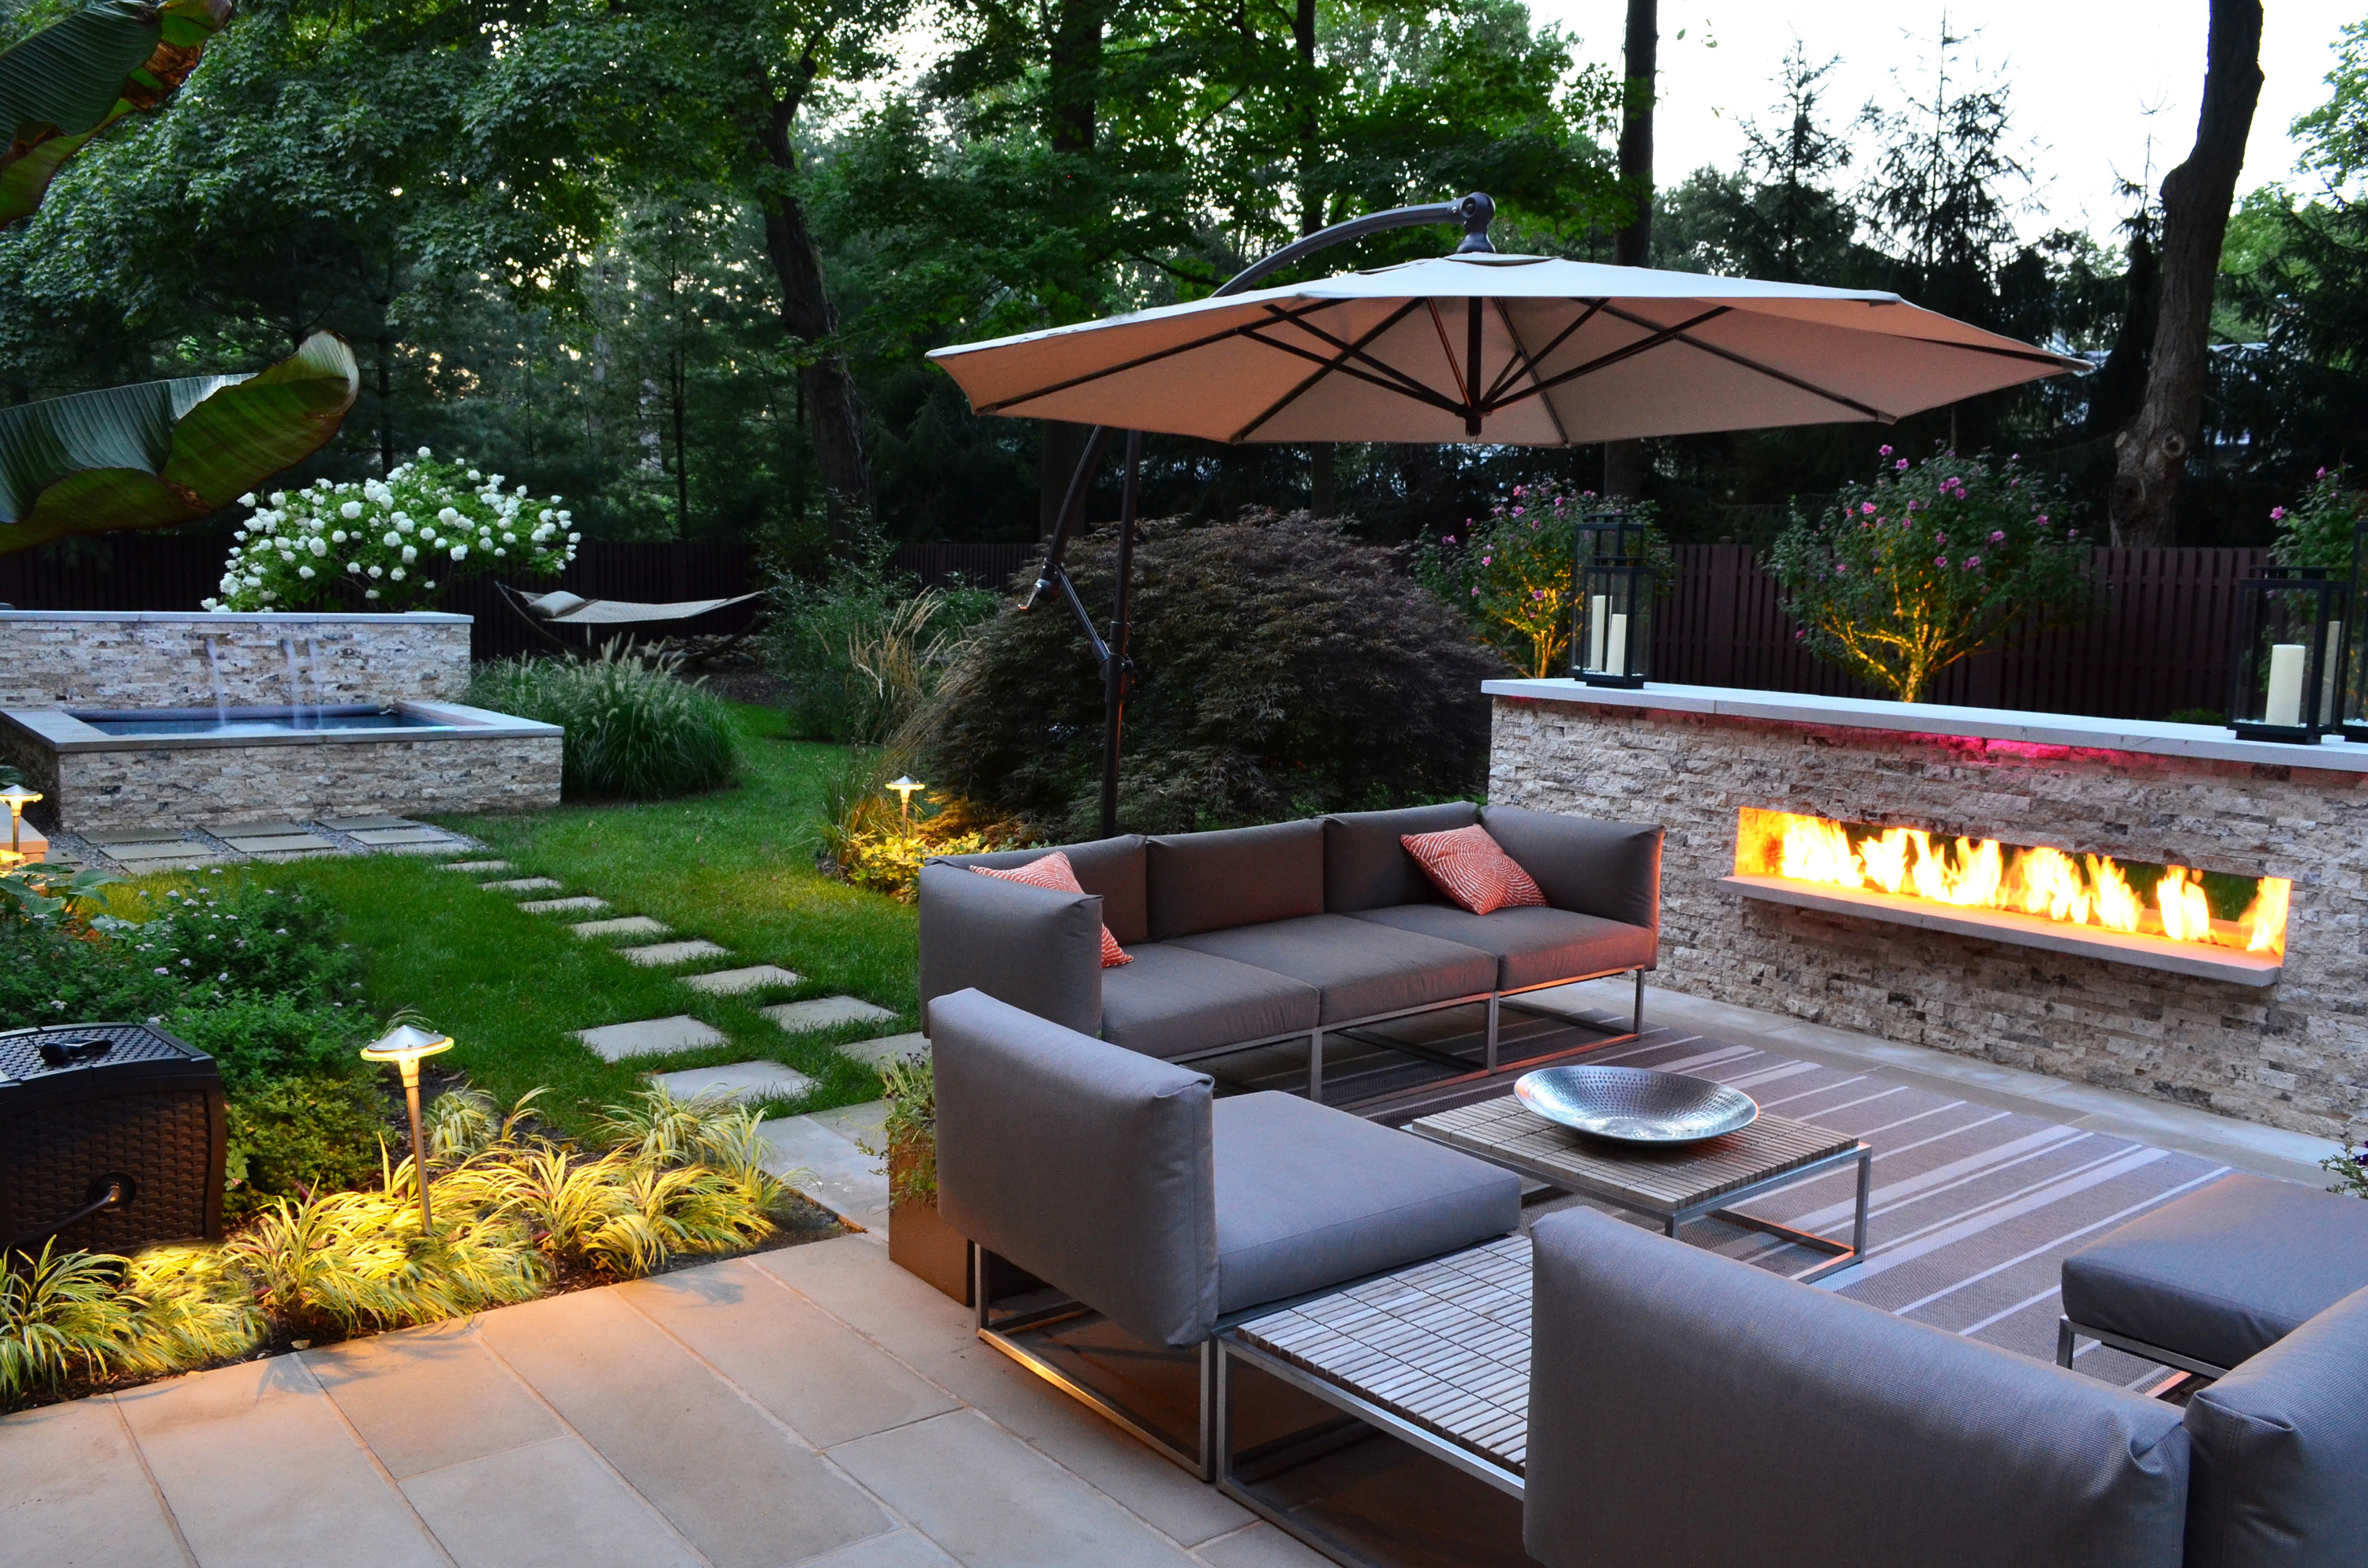 Charming-Modern-Patio-With-Gray-Stone-Outdoor-Fireplace-Also-Cream-Umbrella-As-Well-As-Beautiful-Garden